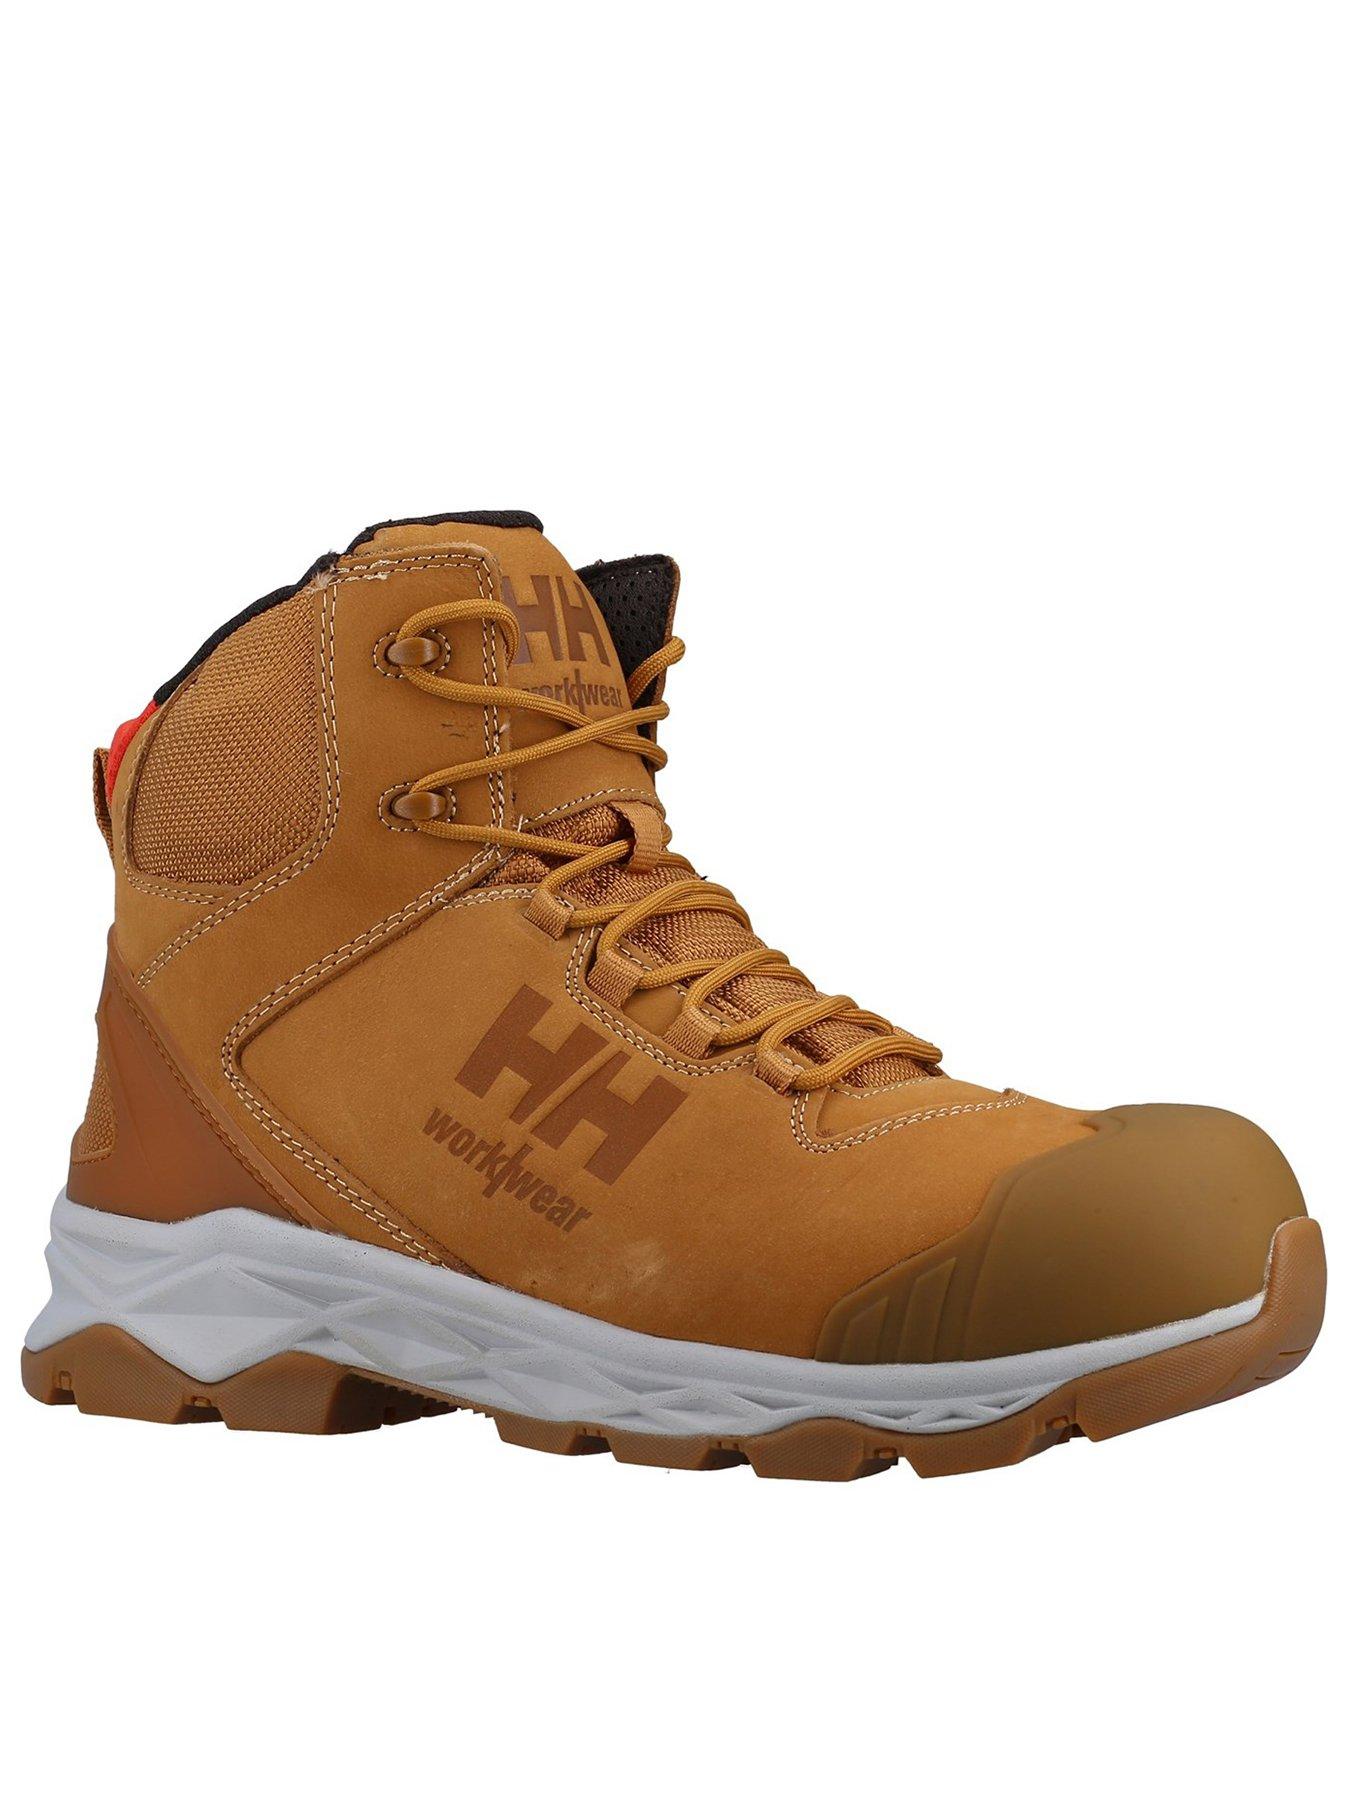 Amblers FS102 SBP honey nubuck lace-up steel toe safety work boot with midsole 